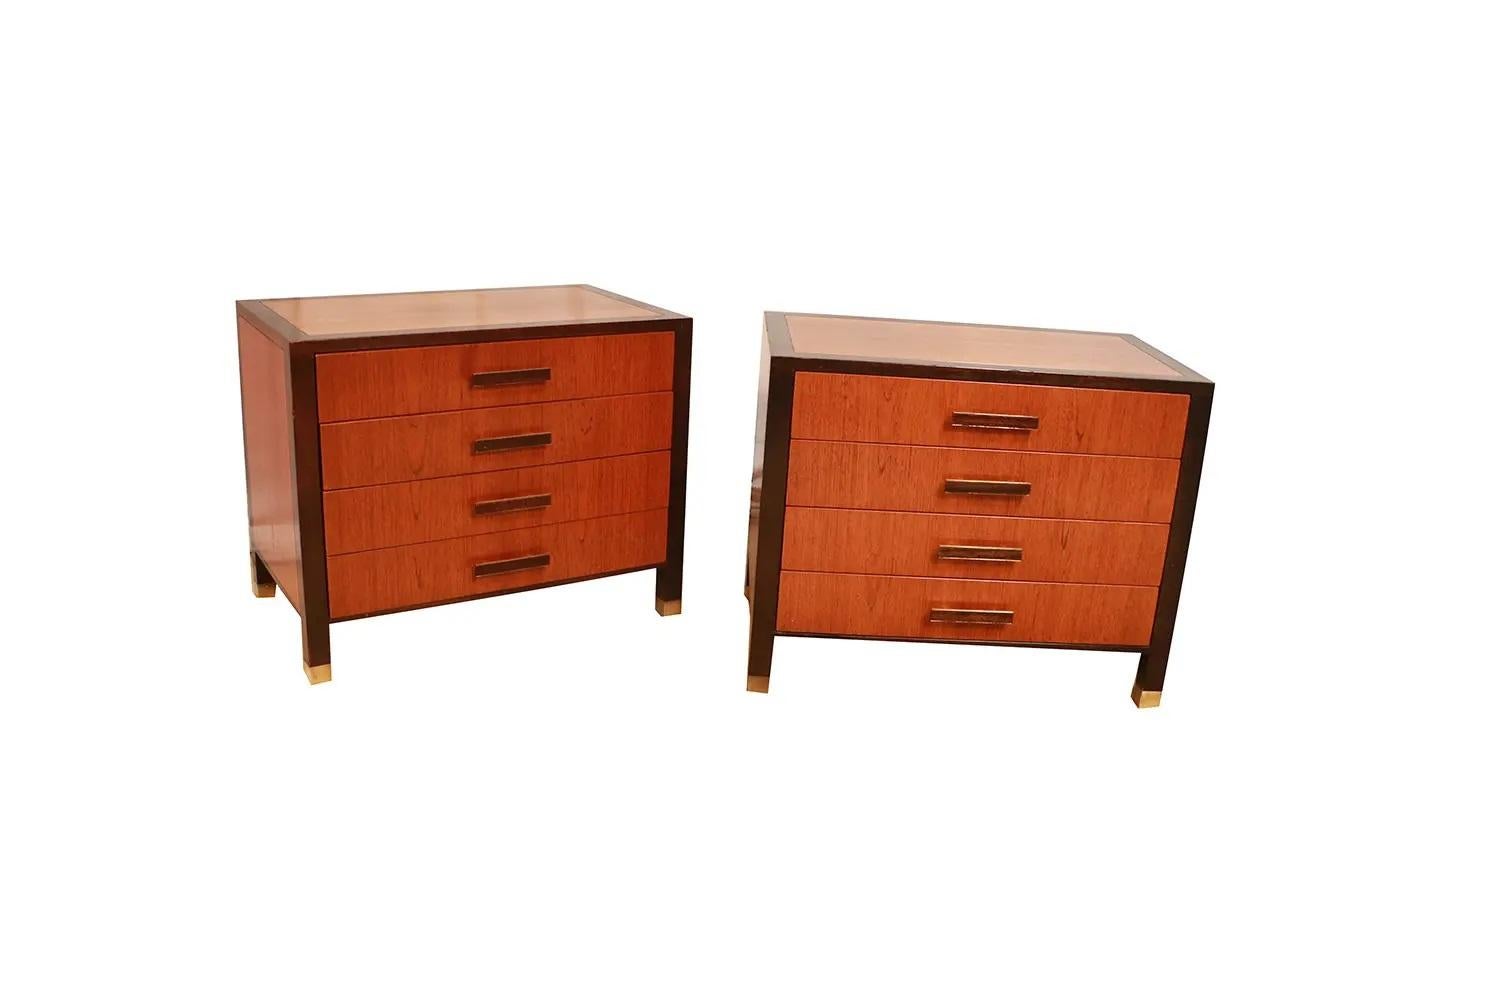 A remarkable pair of mid-century nightstands, end tables by Harvey Probber. These absolute jewels remain in nearly pristine condition. The lines are clean and elegant with exceptional construction and style. Features square top above four spacious